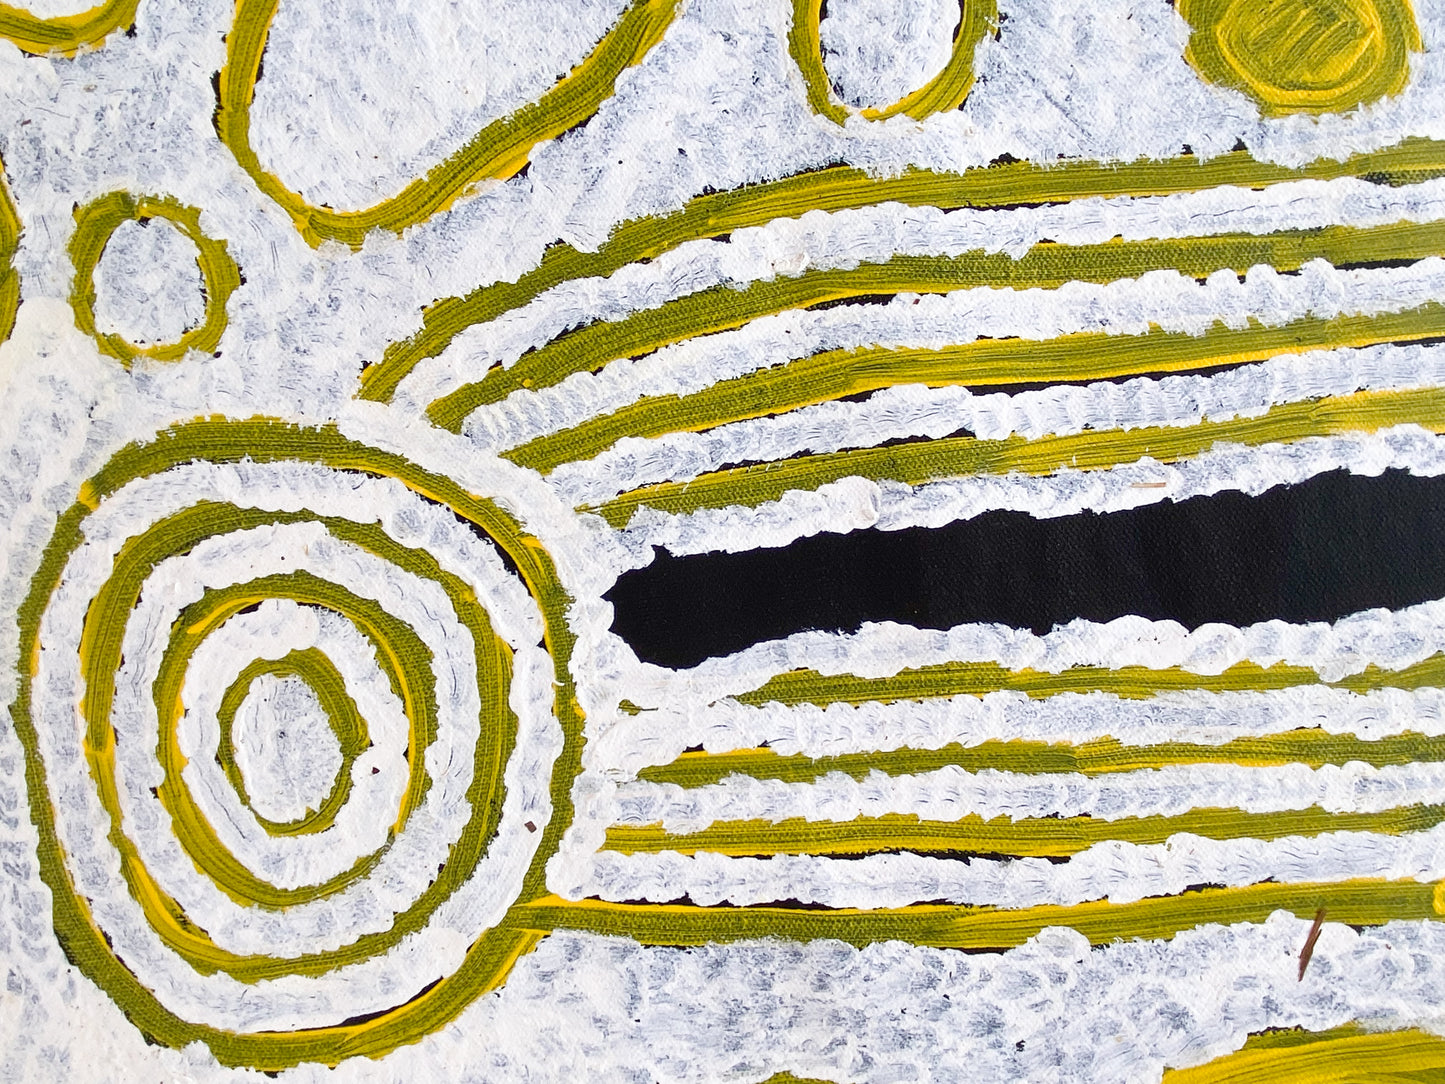 ROMA GIBSON NUNGARRAYI + aboriginal art + indigenous art + Australian art + traditional art + iconography + symbolism + art for sale + artwork + painting for sale + kintore + darwin based gallery + family owned business + art story + home + interior design + decor + interiors